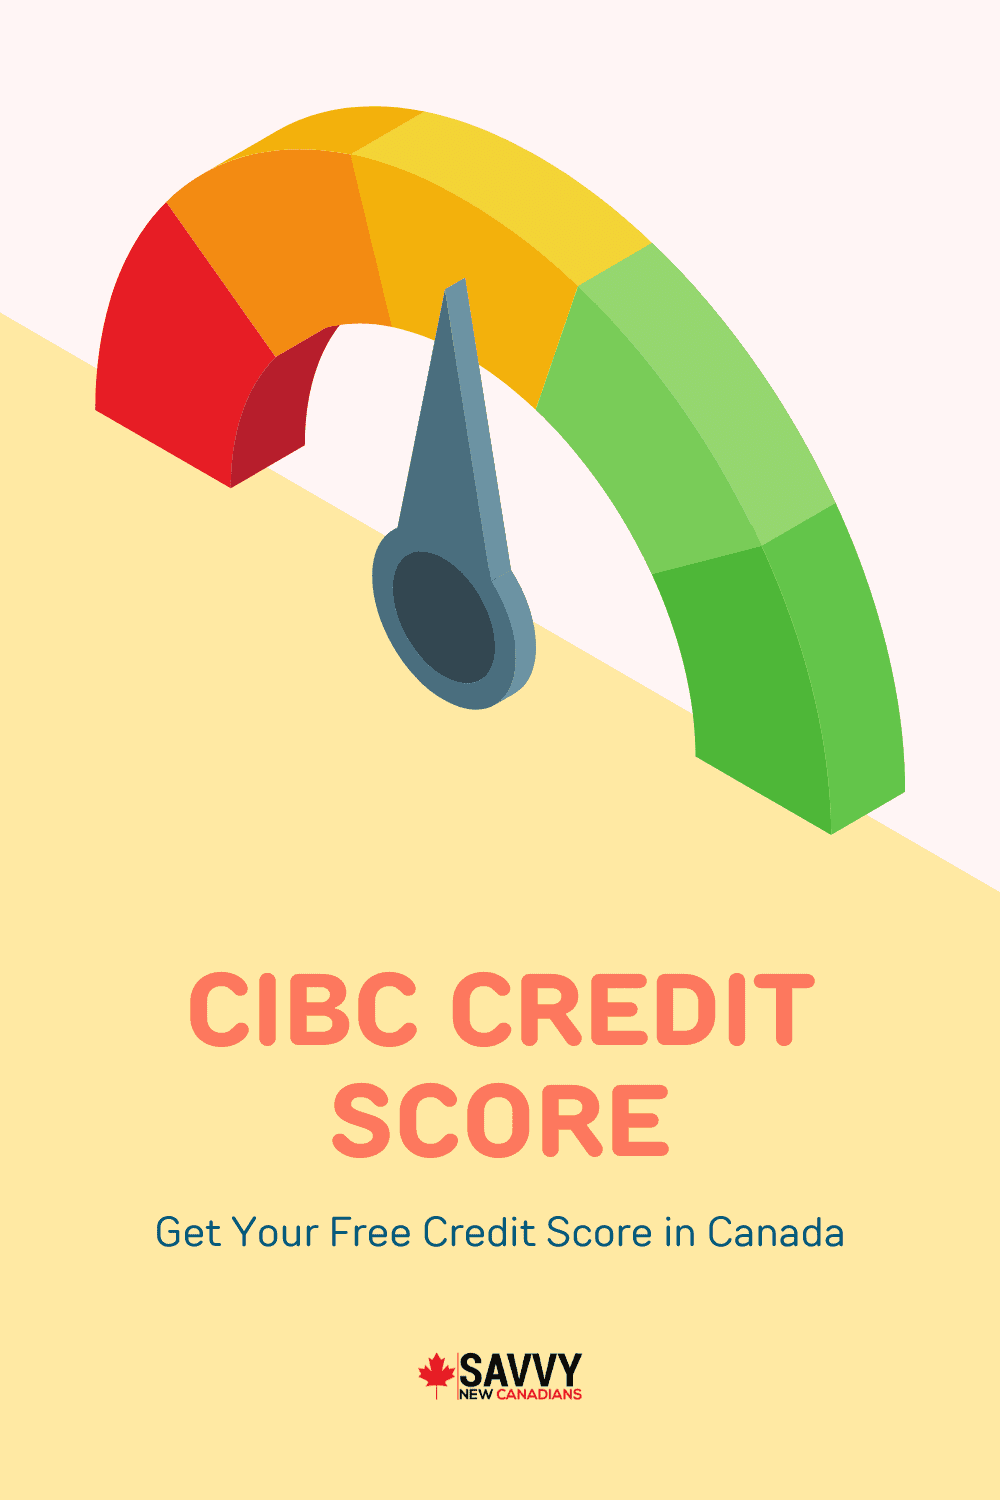 CIBC Credit Score: How To Get Your Free Credit Score in 2022